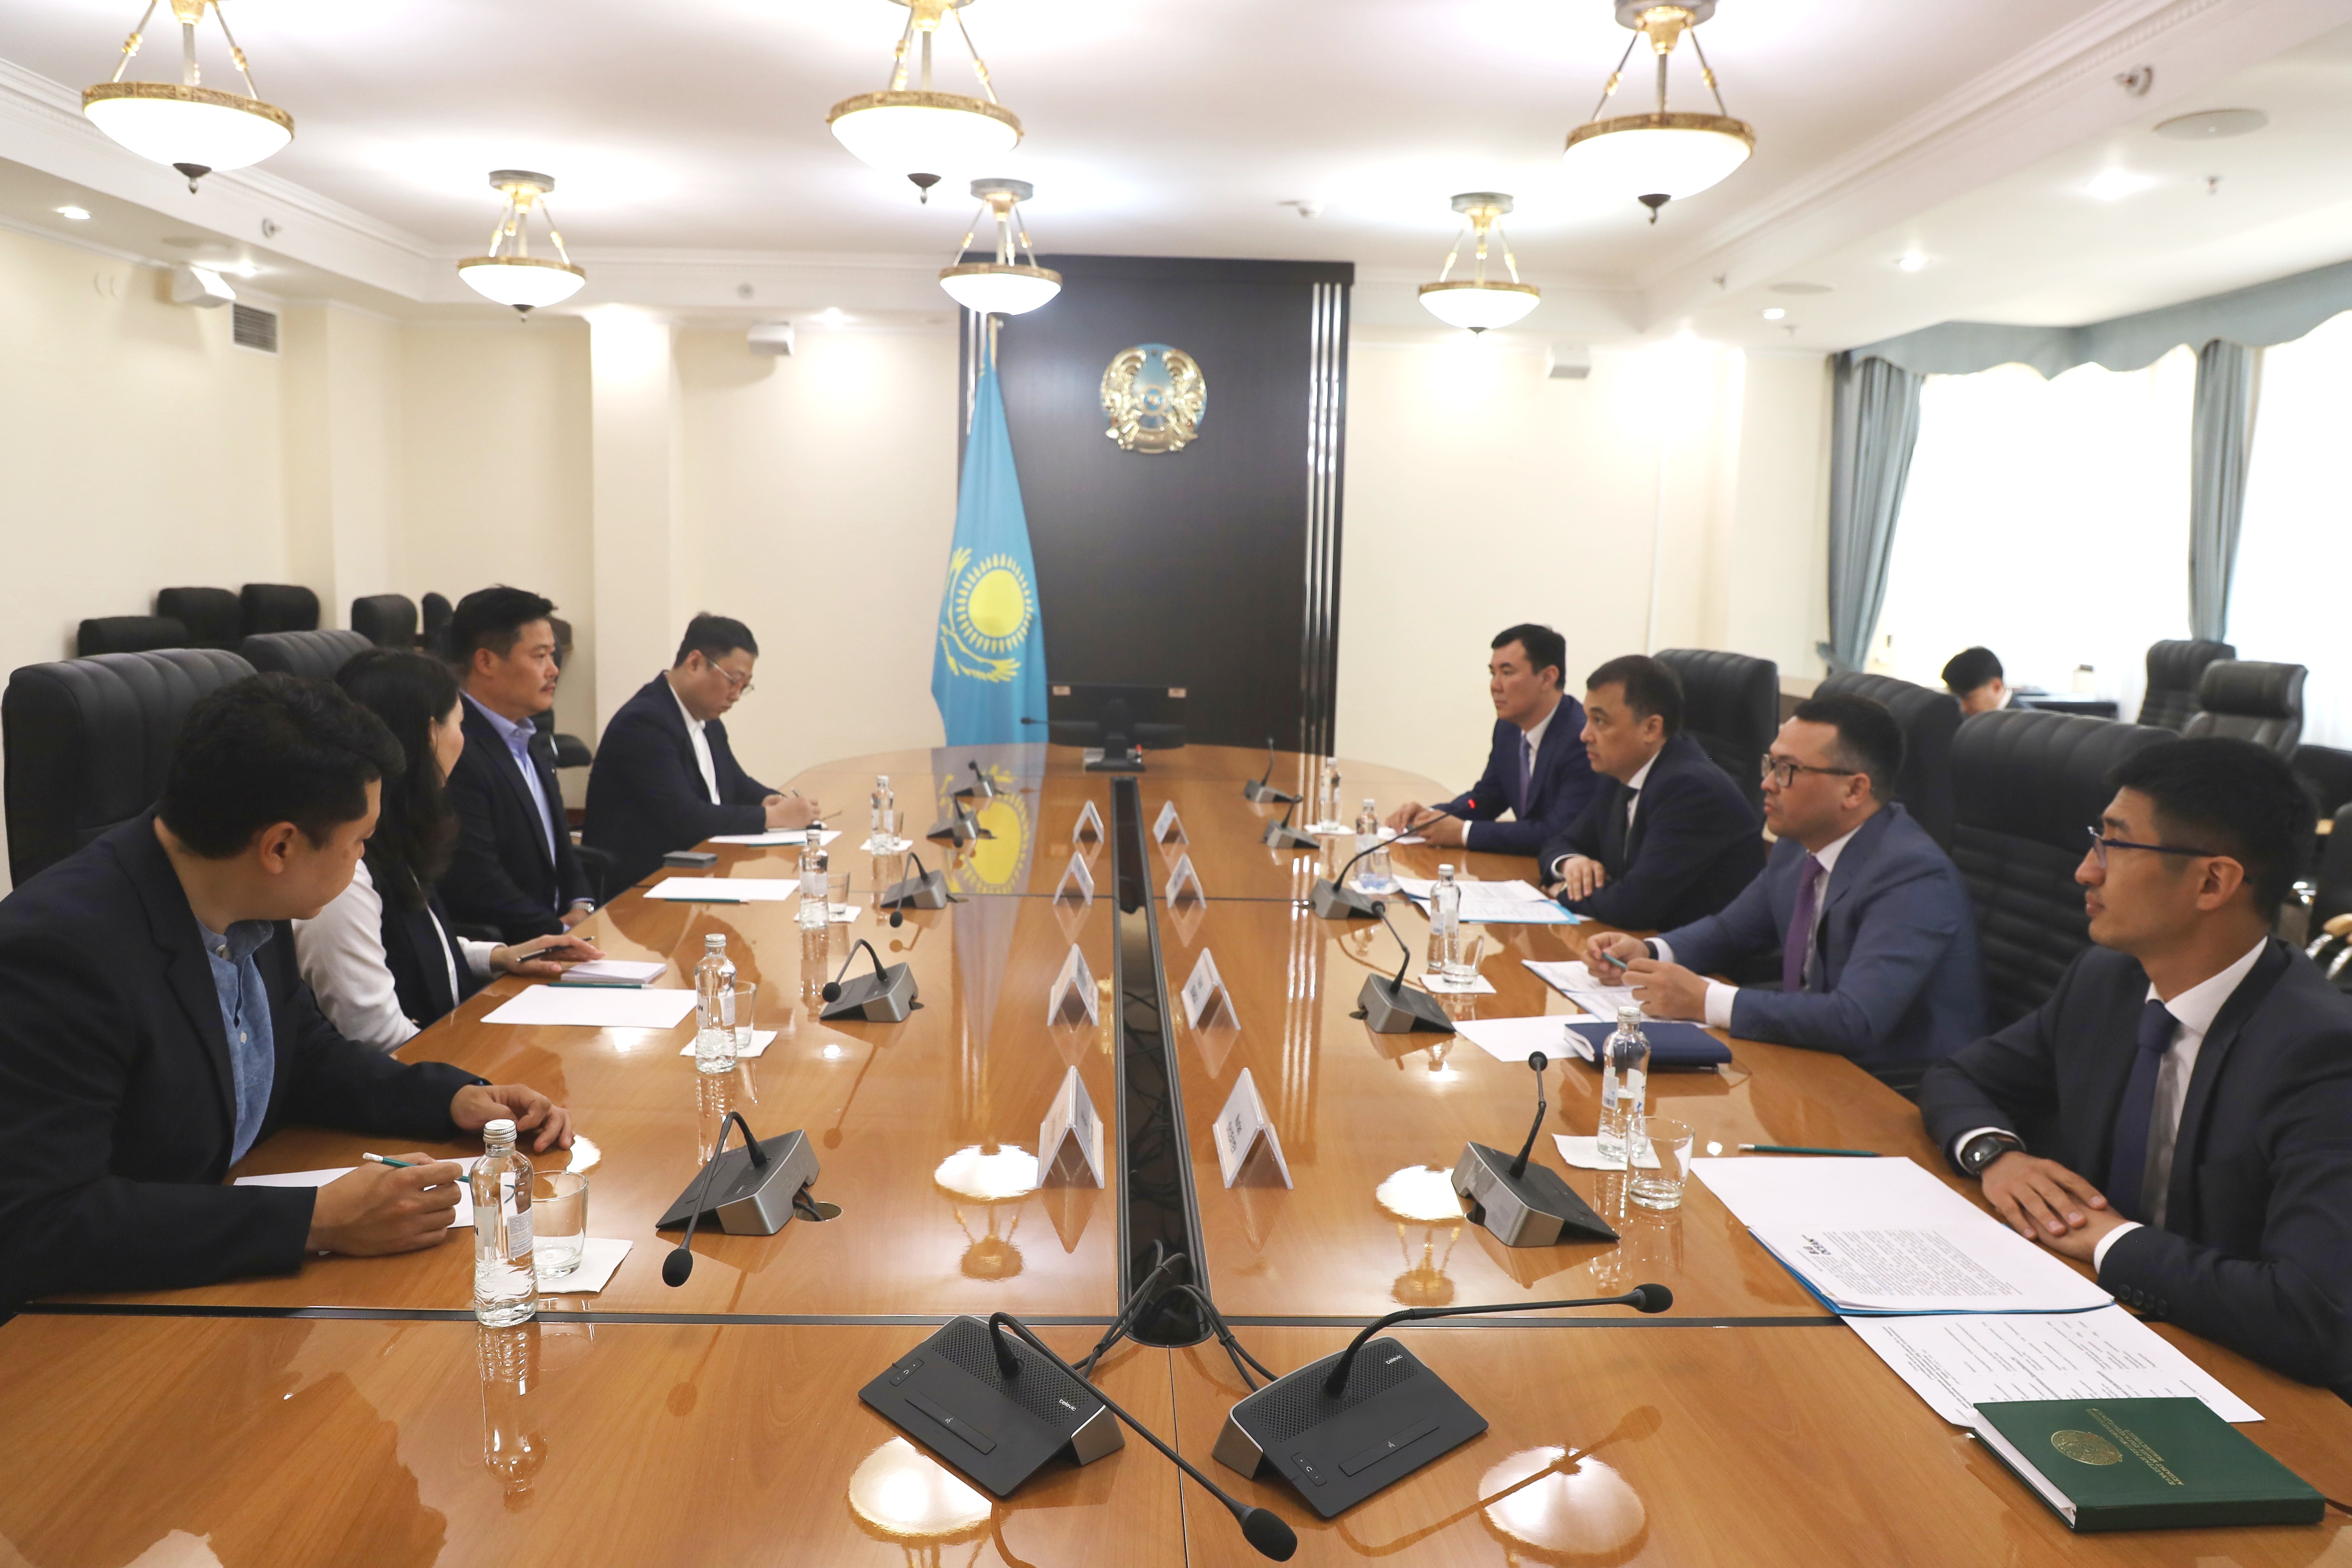 Korean "Big ocean entertainment" is interested in cooperation with Kazakhstan